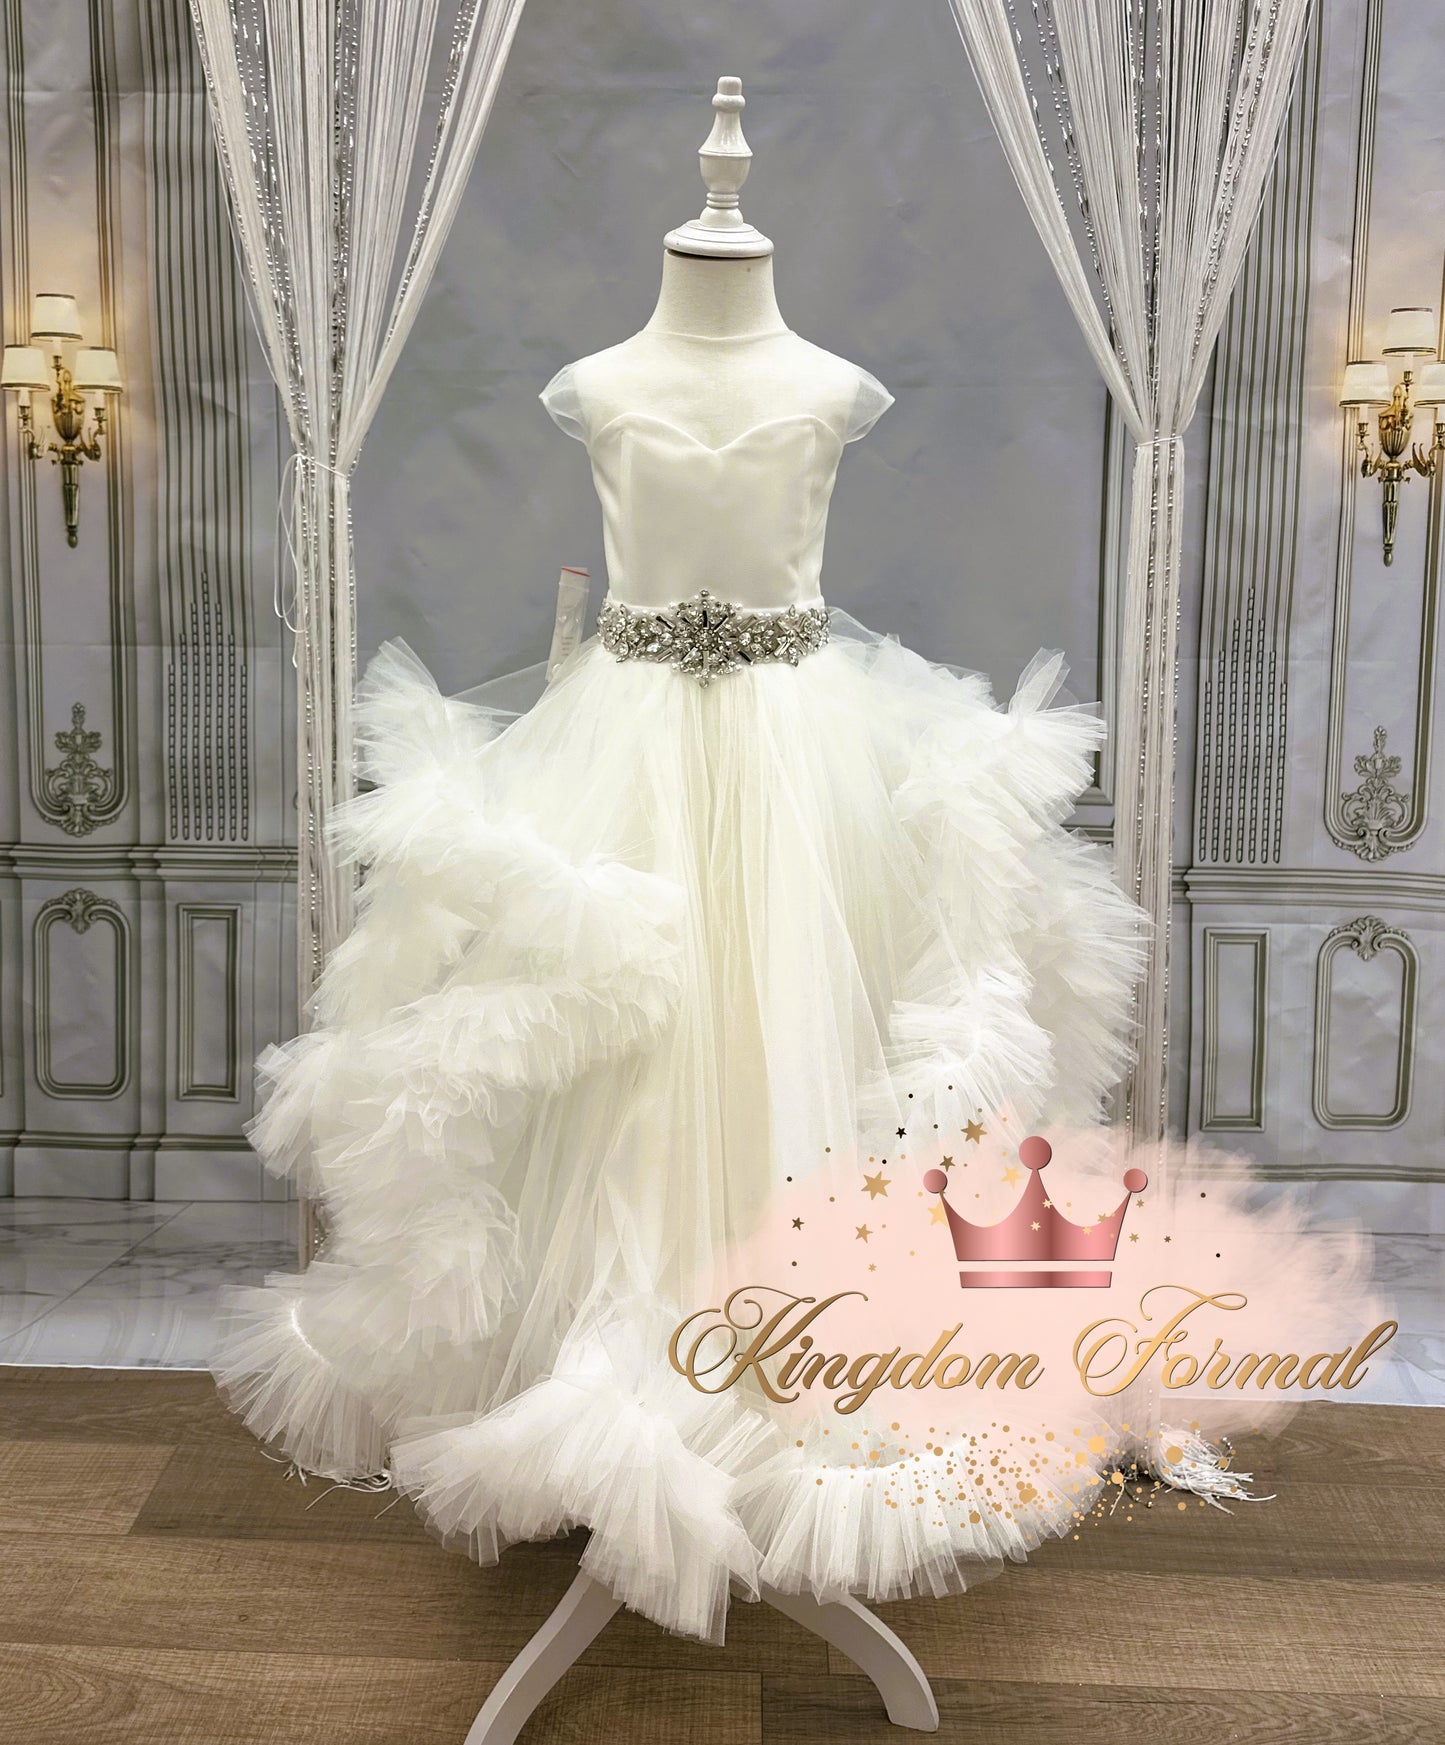 The Tovianna Gown